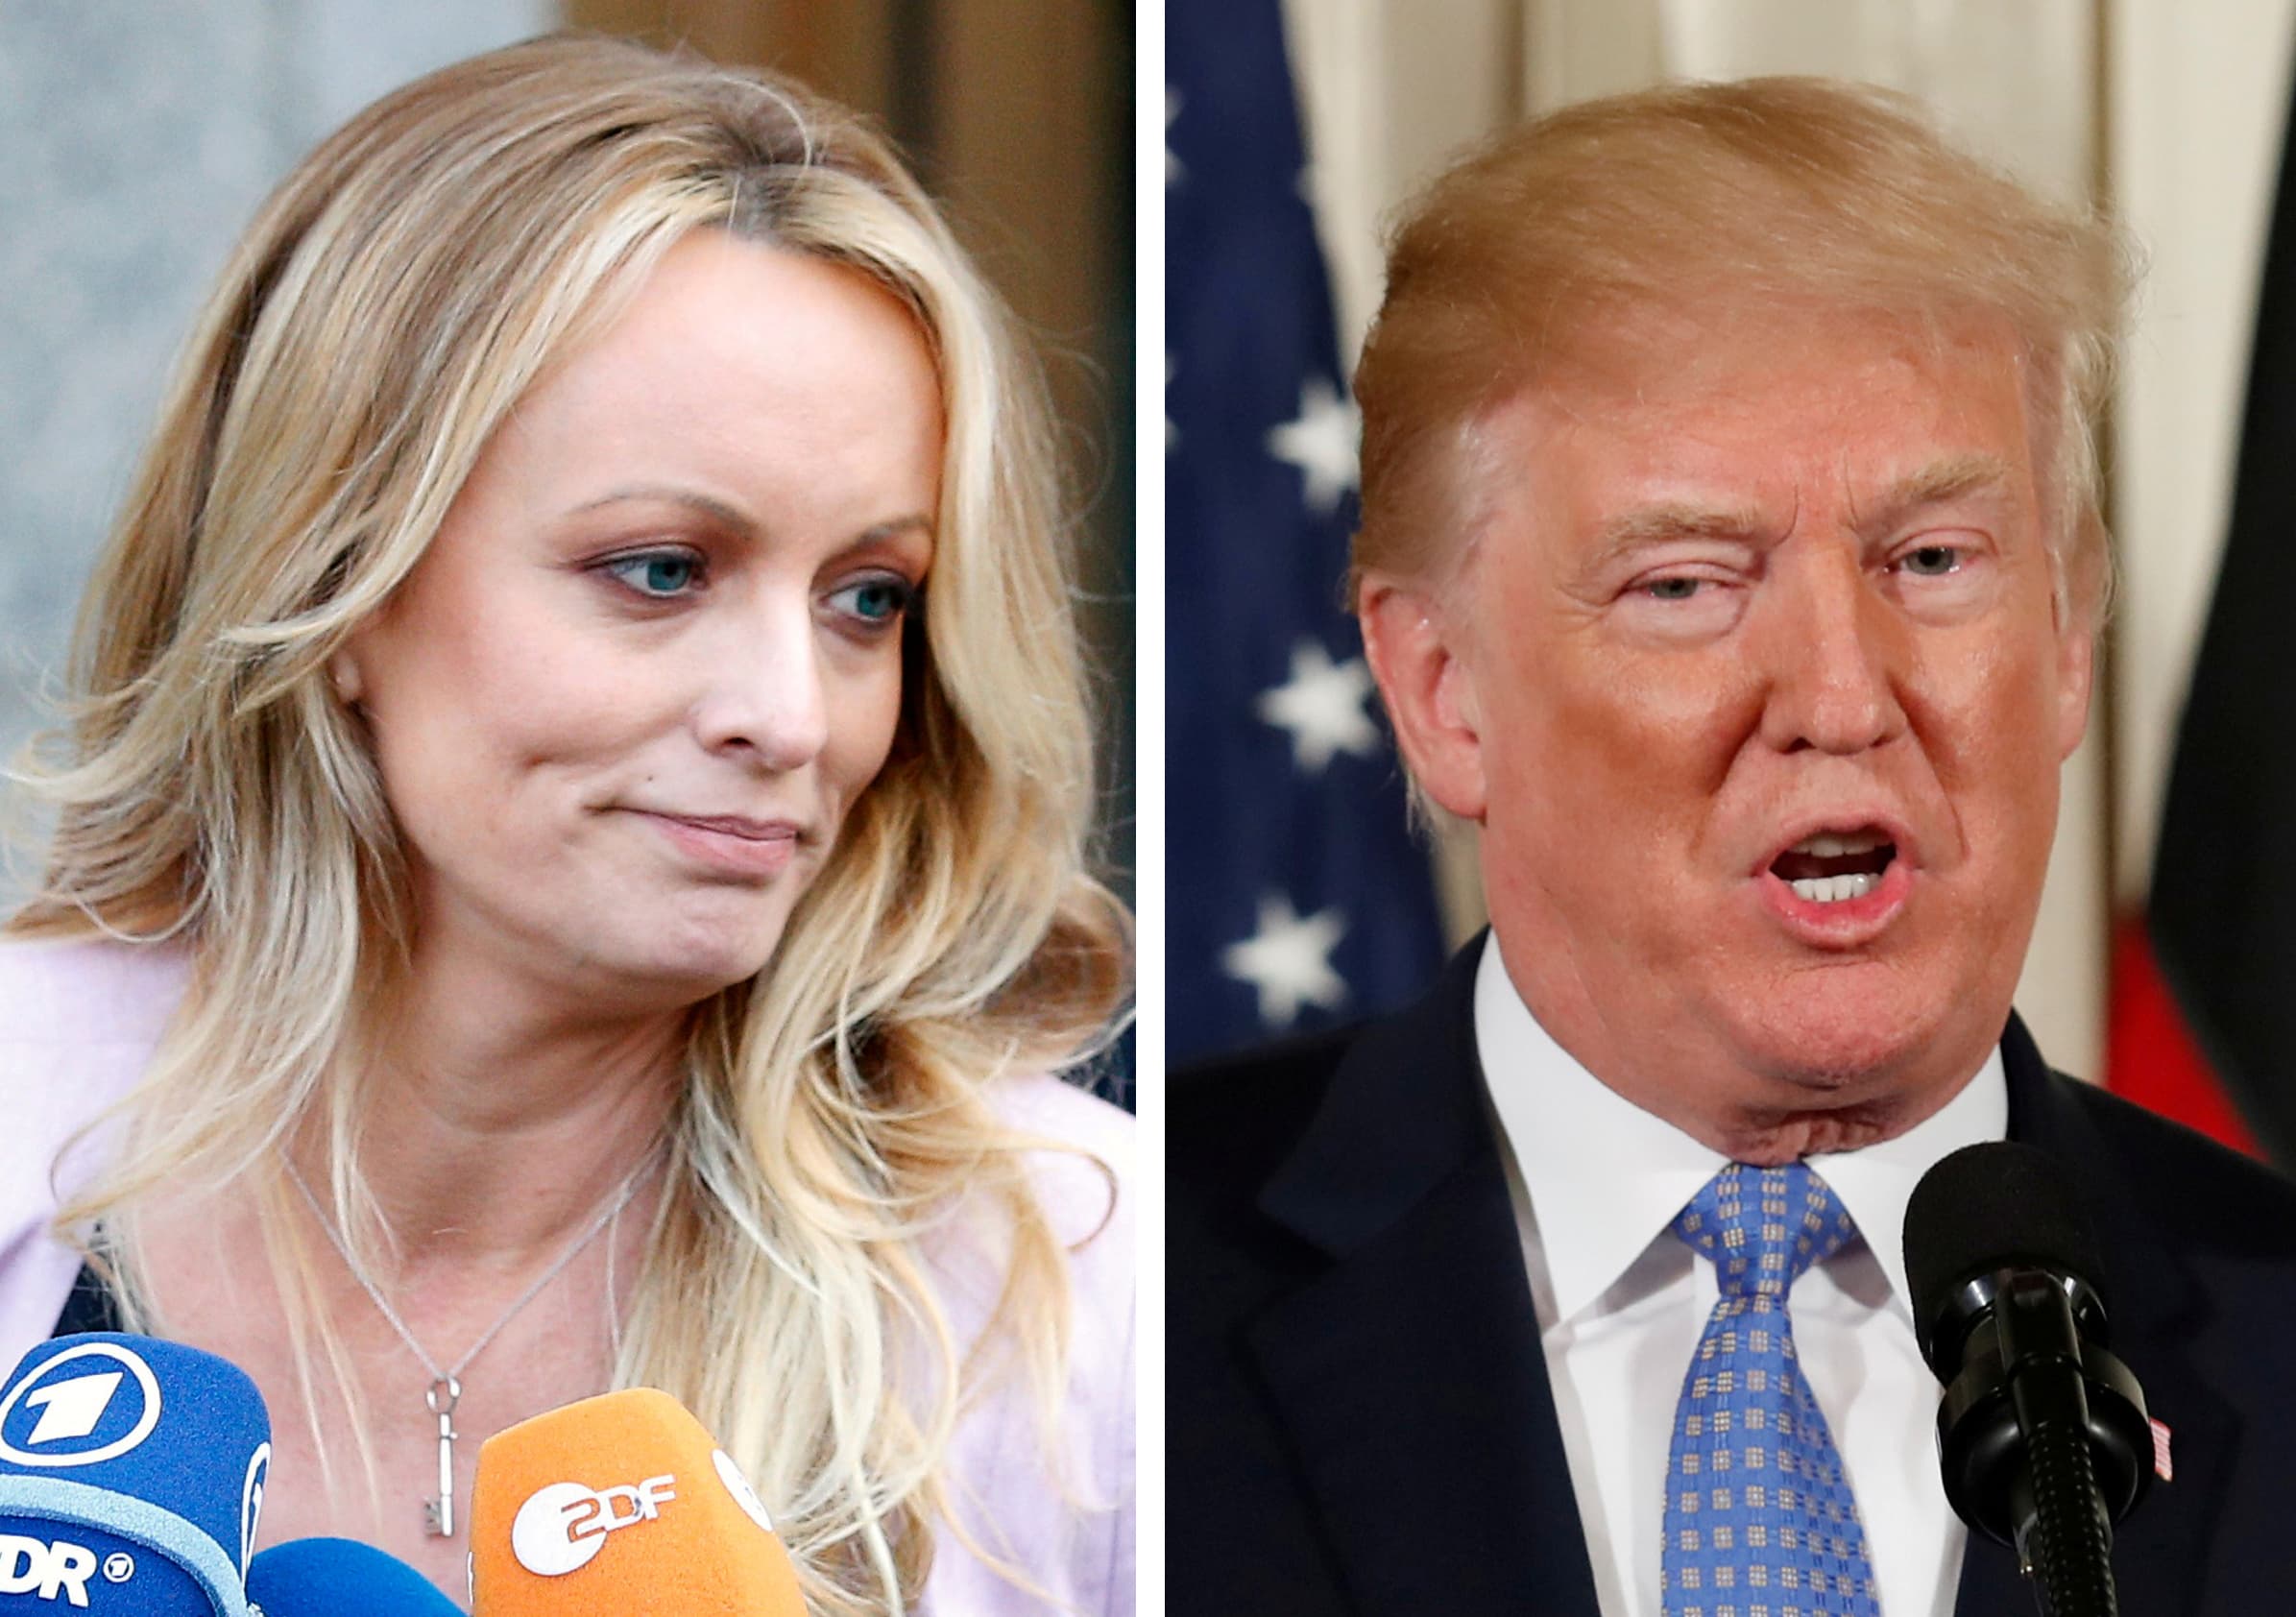 Porn star Stormy Daniels loses appeal of Trump case